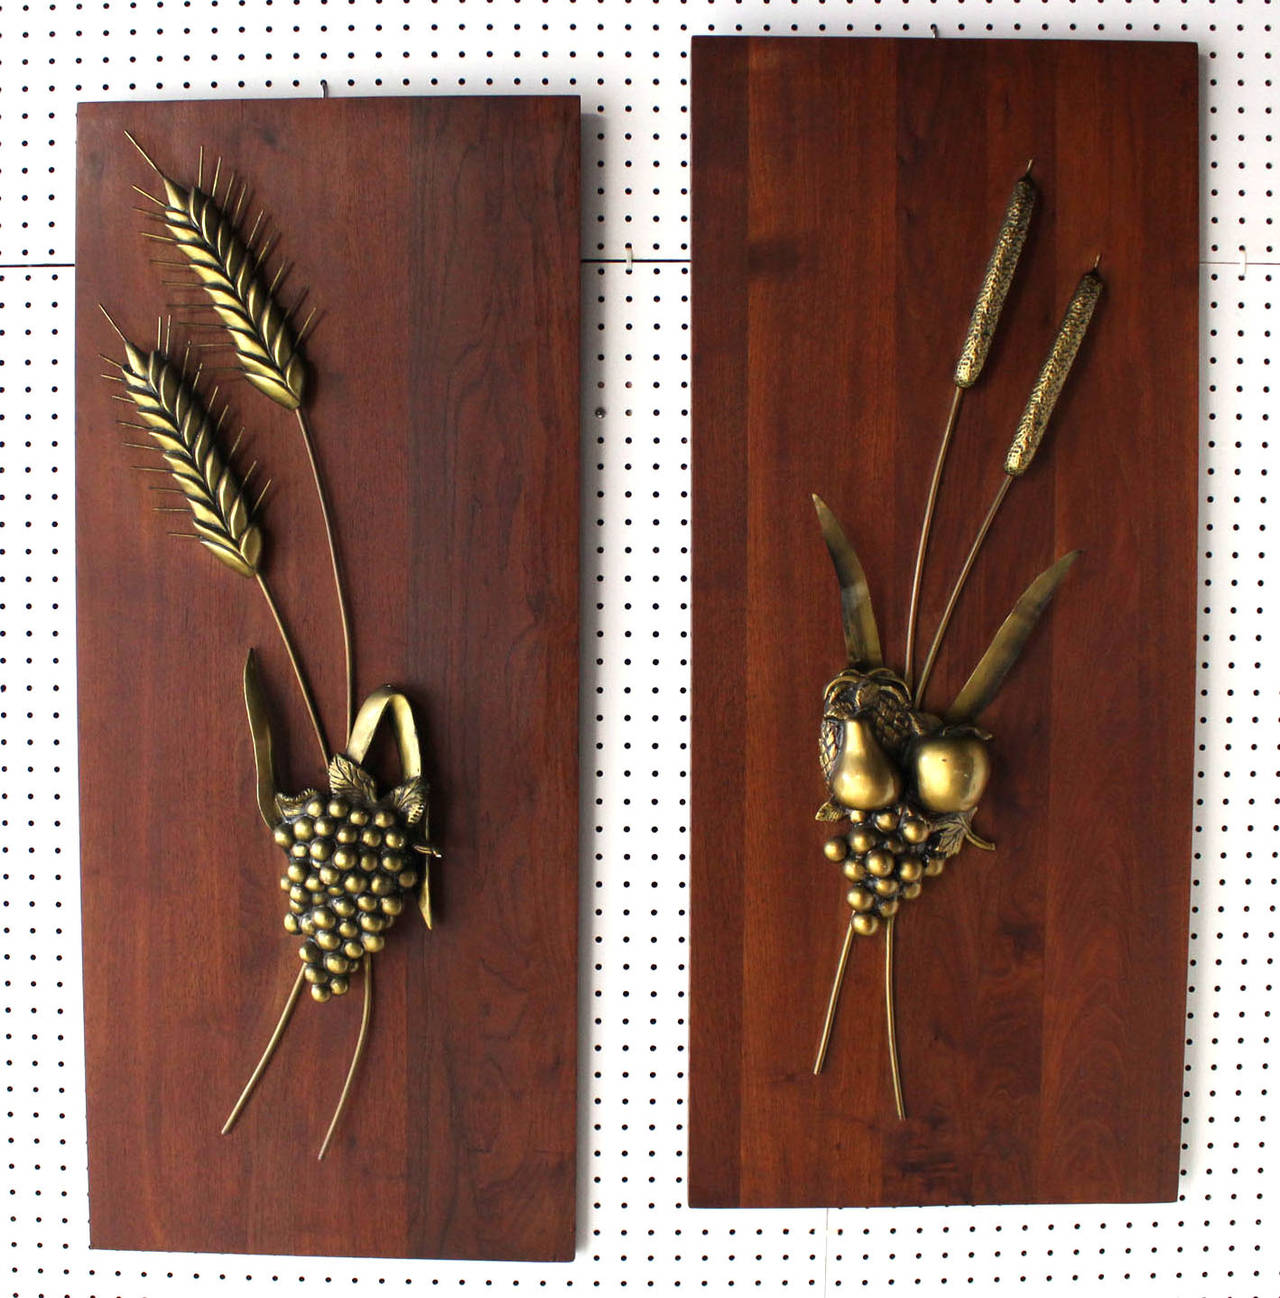 Pair of solid cast metal sculptures of wheat, grapes, apple, pear and reed on solid walnut board.